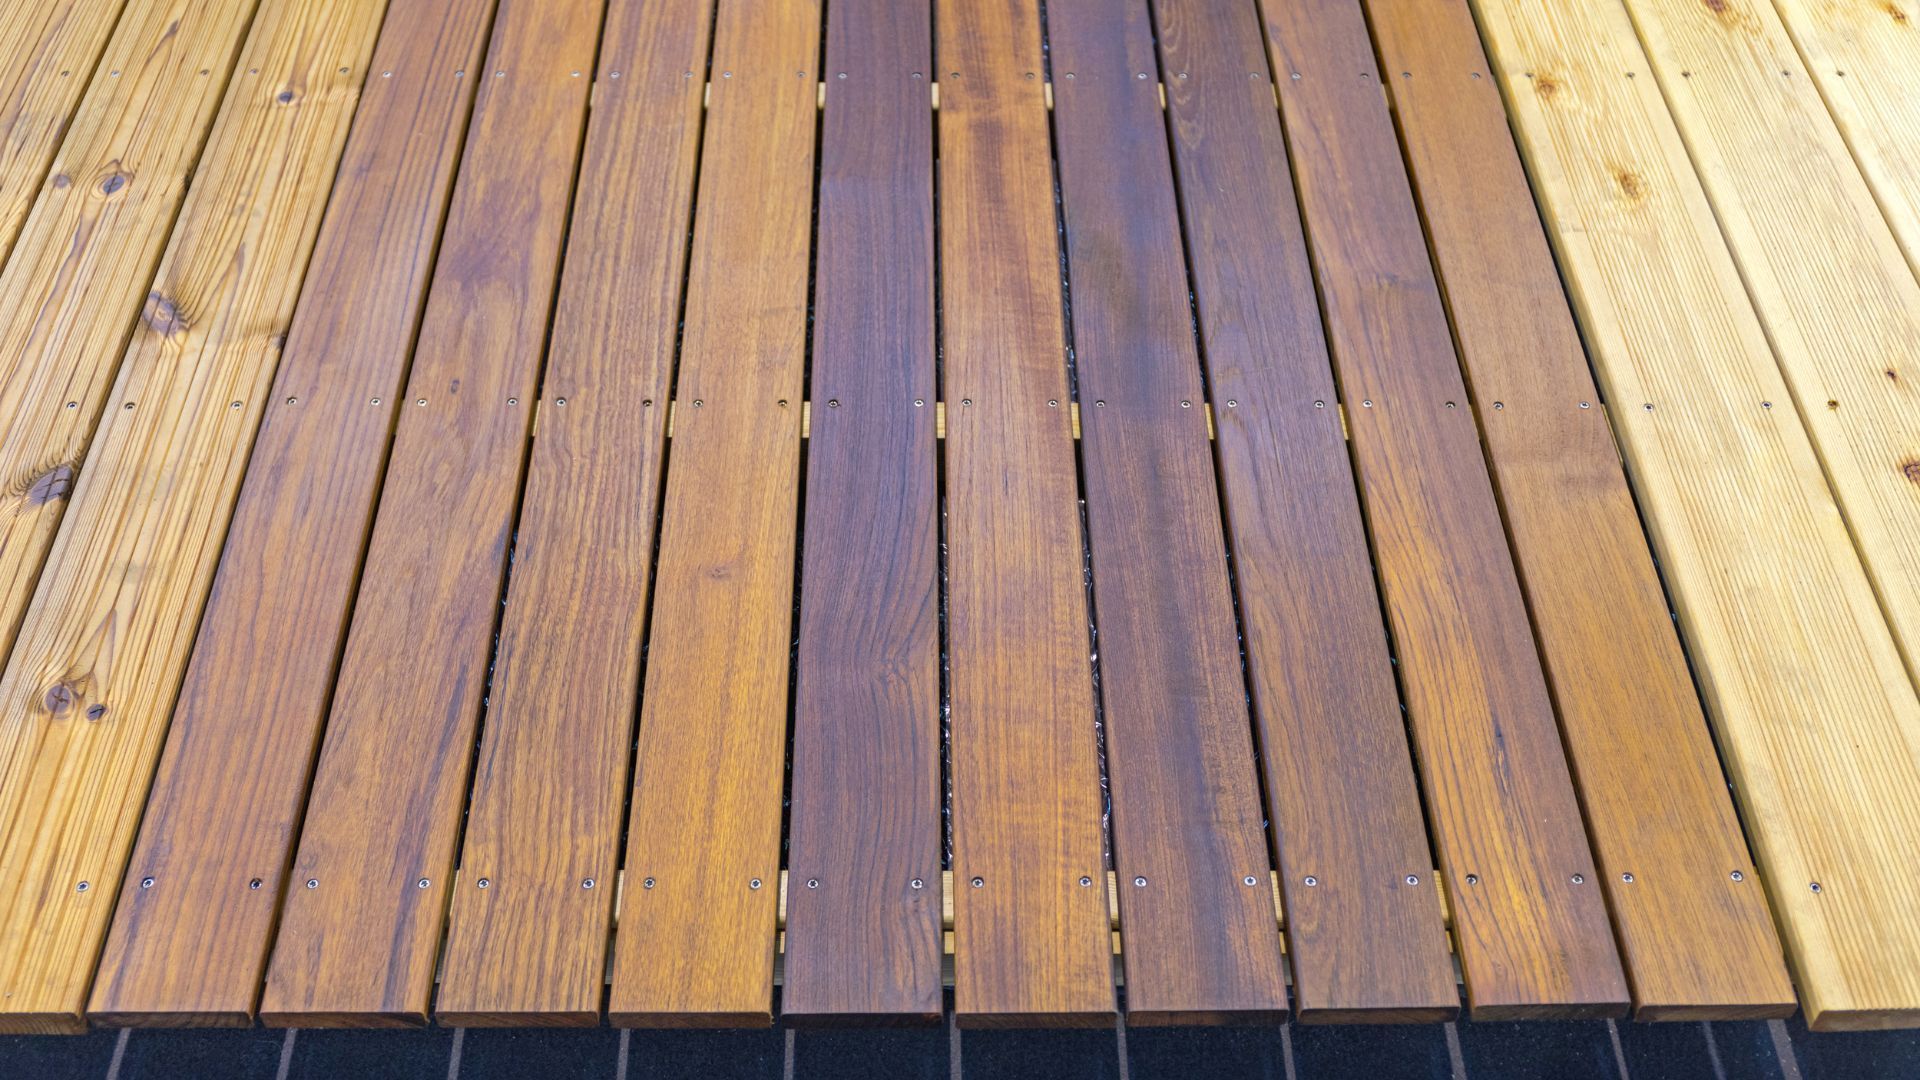 Close-up of a stained wooden deck in Athens, GA, showing different shades and wood grain patterns.